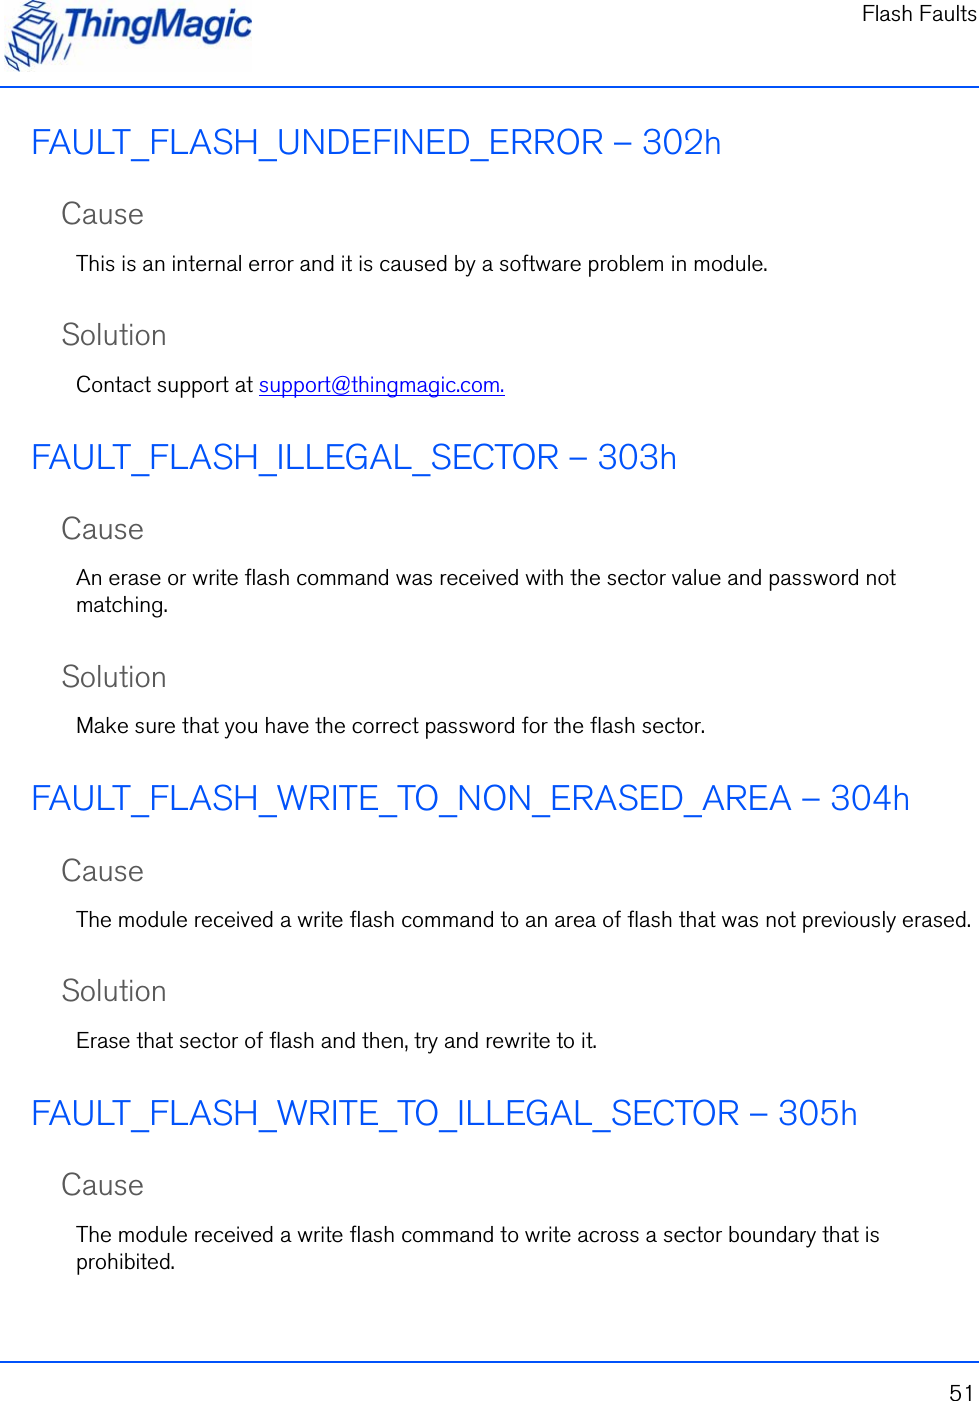 Flash Faults51FAULT_FLASH_UNDEFINED_ERROR – 302hCauseThis is an internal error and it is caused by a software problem in module.SolutionContact support at support@thingmagic.com.FAULT_FLASH_ILLEGAL_SECTOR – 303hCauseAn erase or write flash command was received with the sector value and password not matching.SolutionMake sure that you have the correct password for the flash sector.  FAULT_FLASH_WRITE_TO_NON_ERASED_AREA – 304hCauseThe module received a write flash command to an area of flash that was not previously erased.SolutionErase that sector of flash and then, try and rewrite to it.FAULT_FLASH_WRITE_TO_ILLEGAL_SECTOR – 305hCauseThe module received a write flash command to write across a sector boundary that is prohibited.